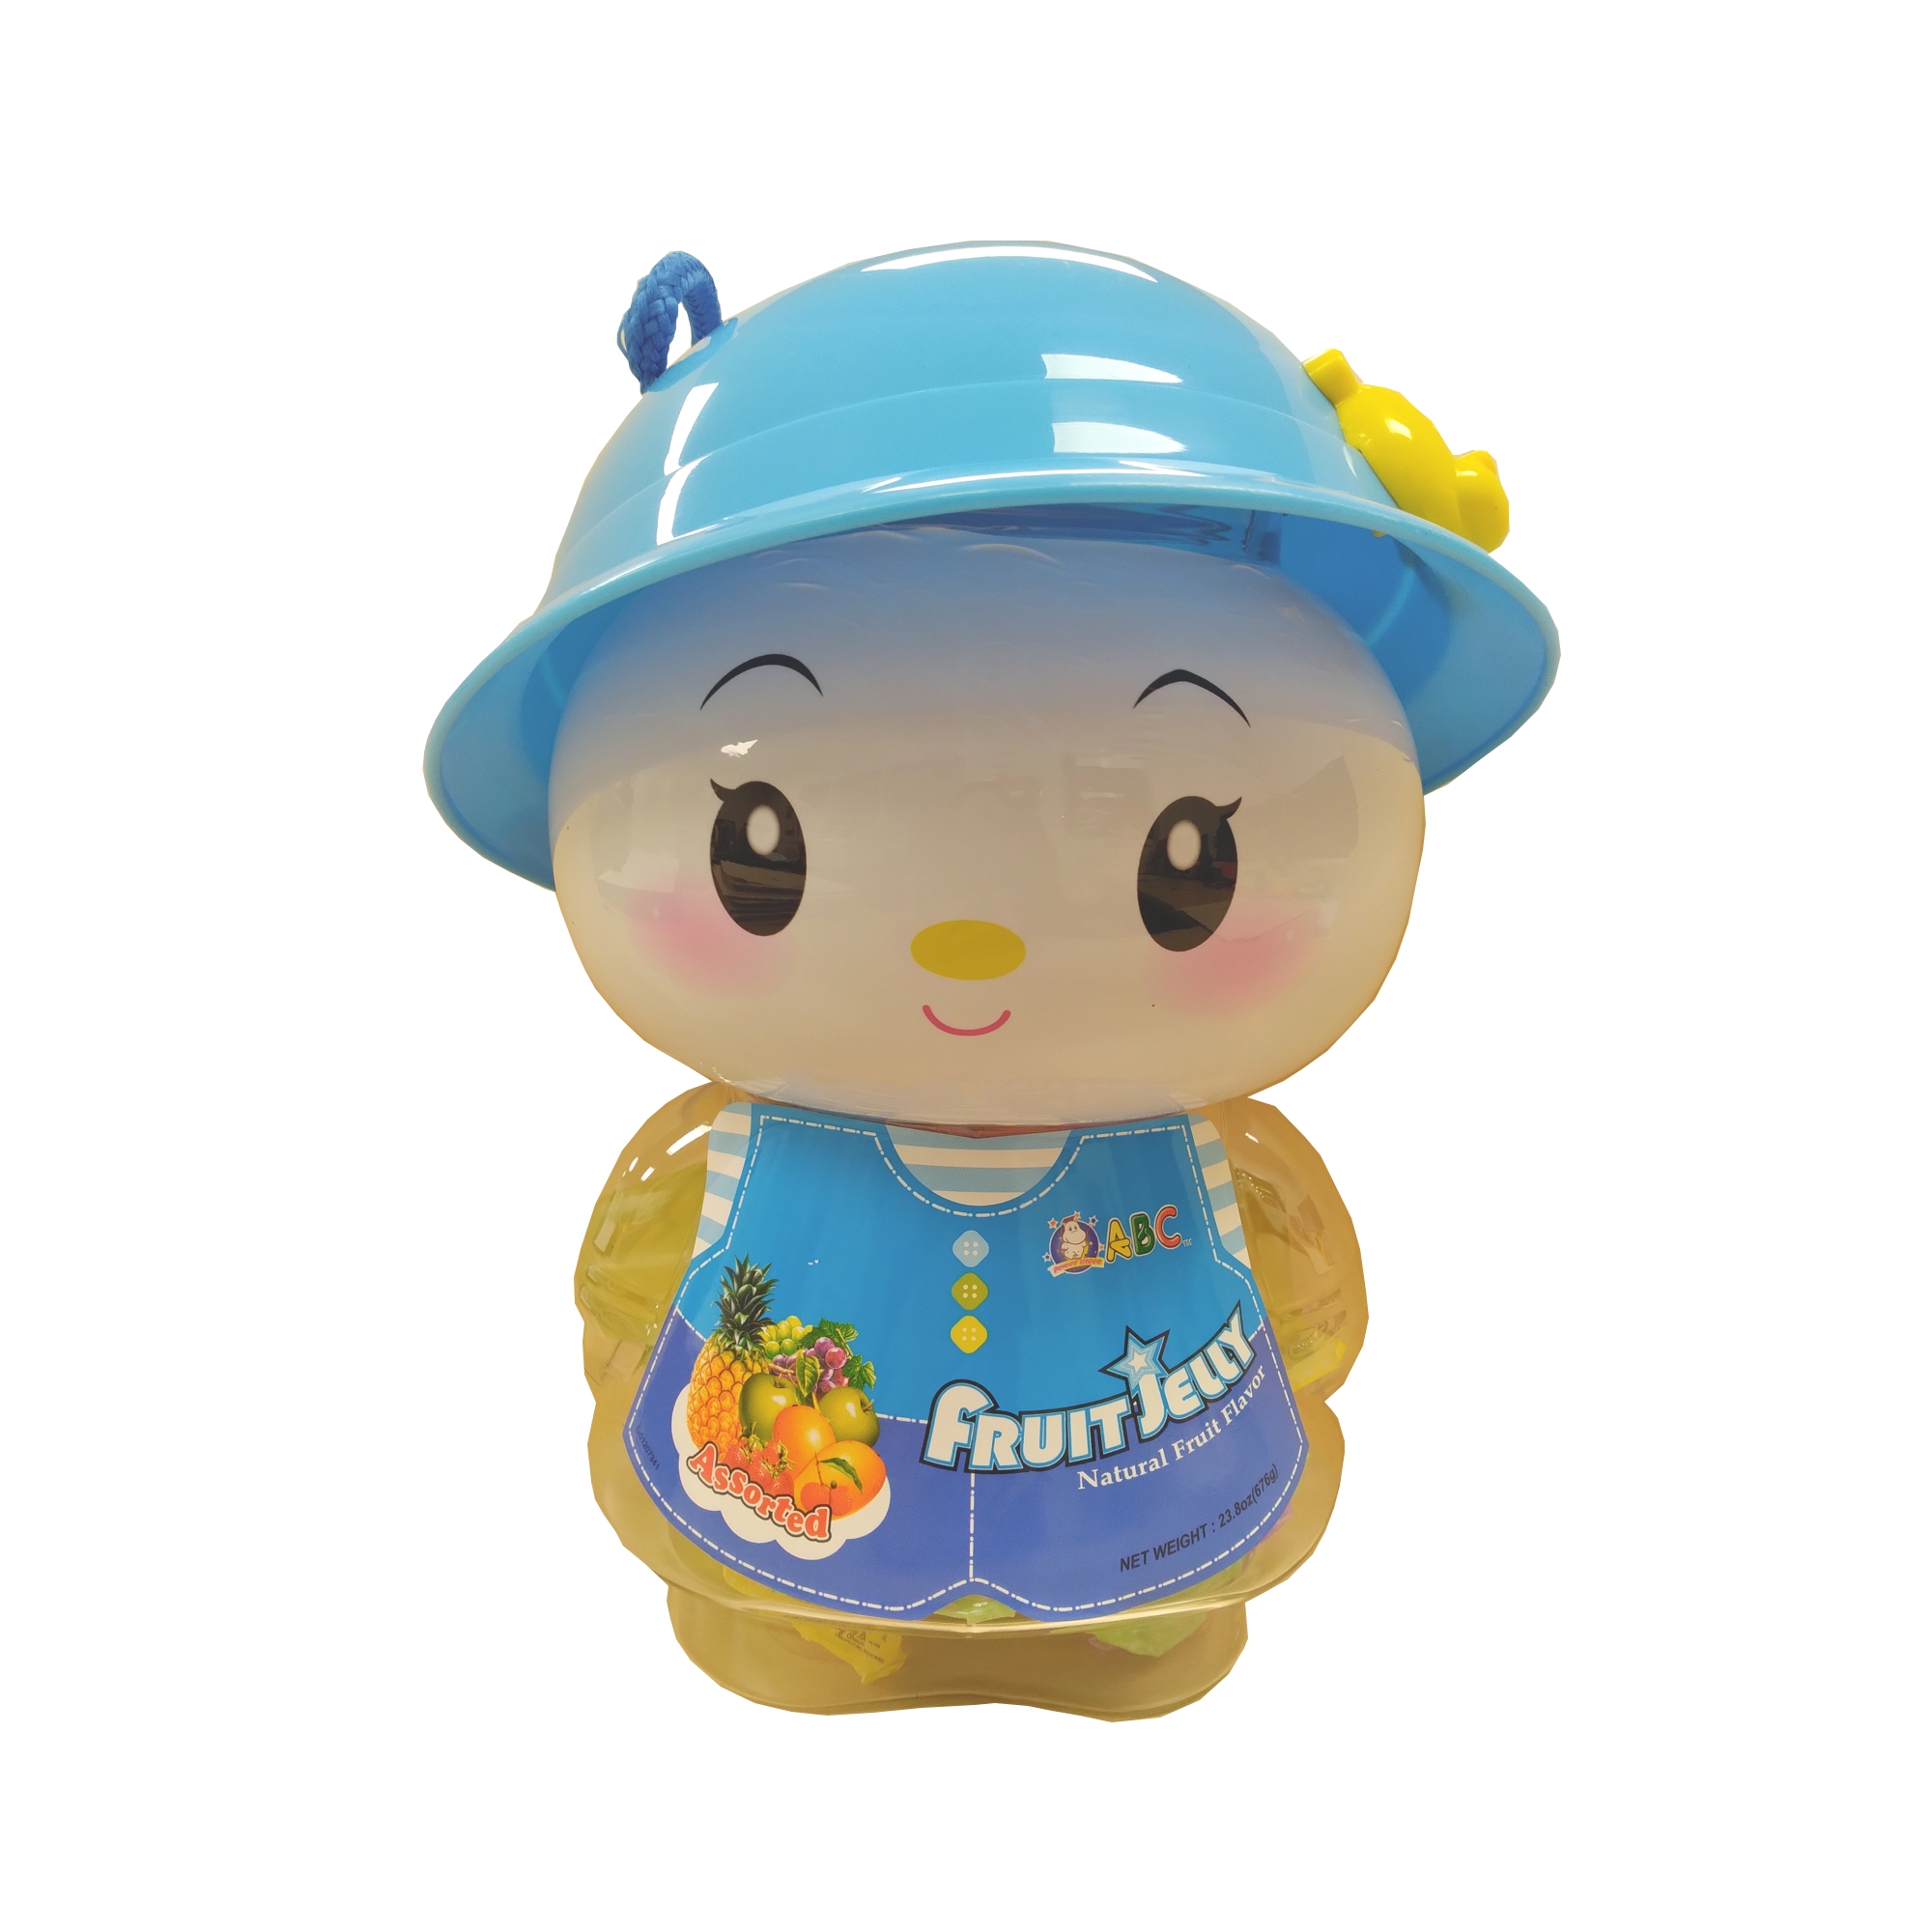 ABC ASSORTED JELLY BABY BOY PET